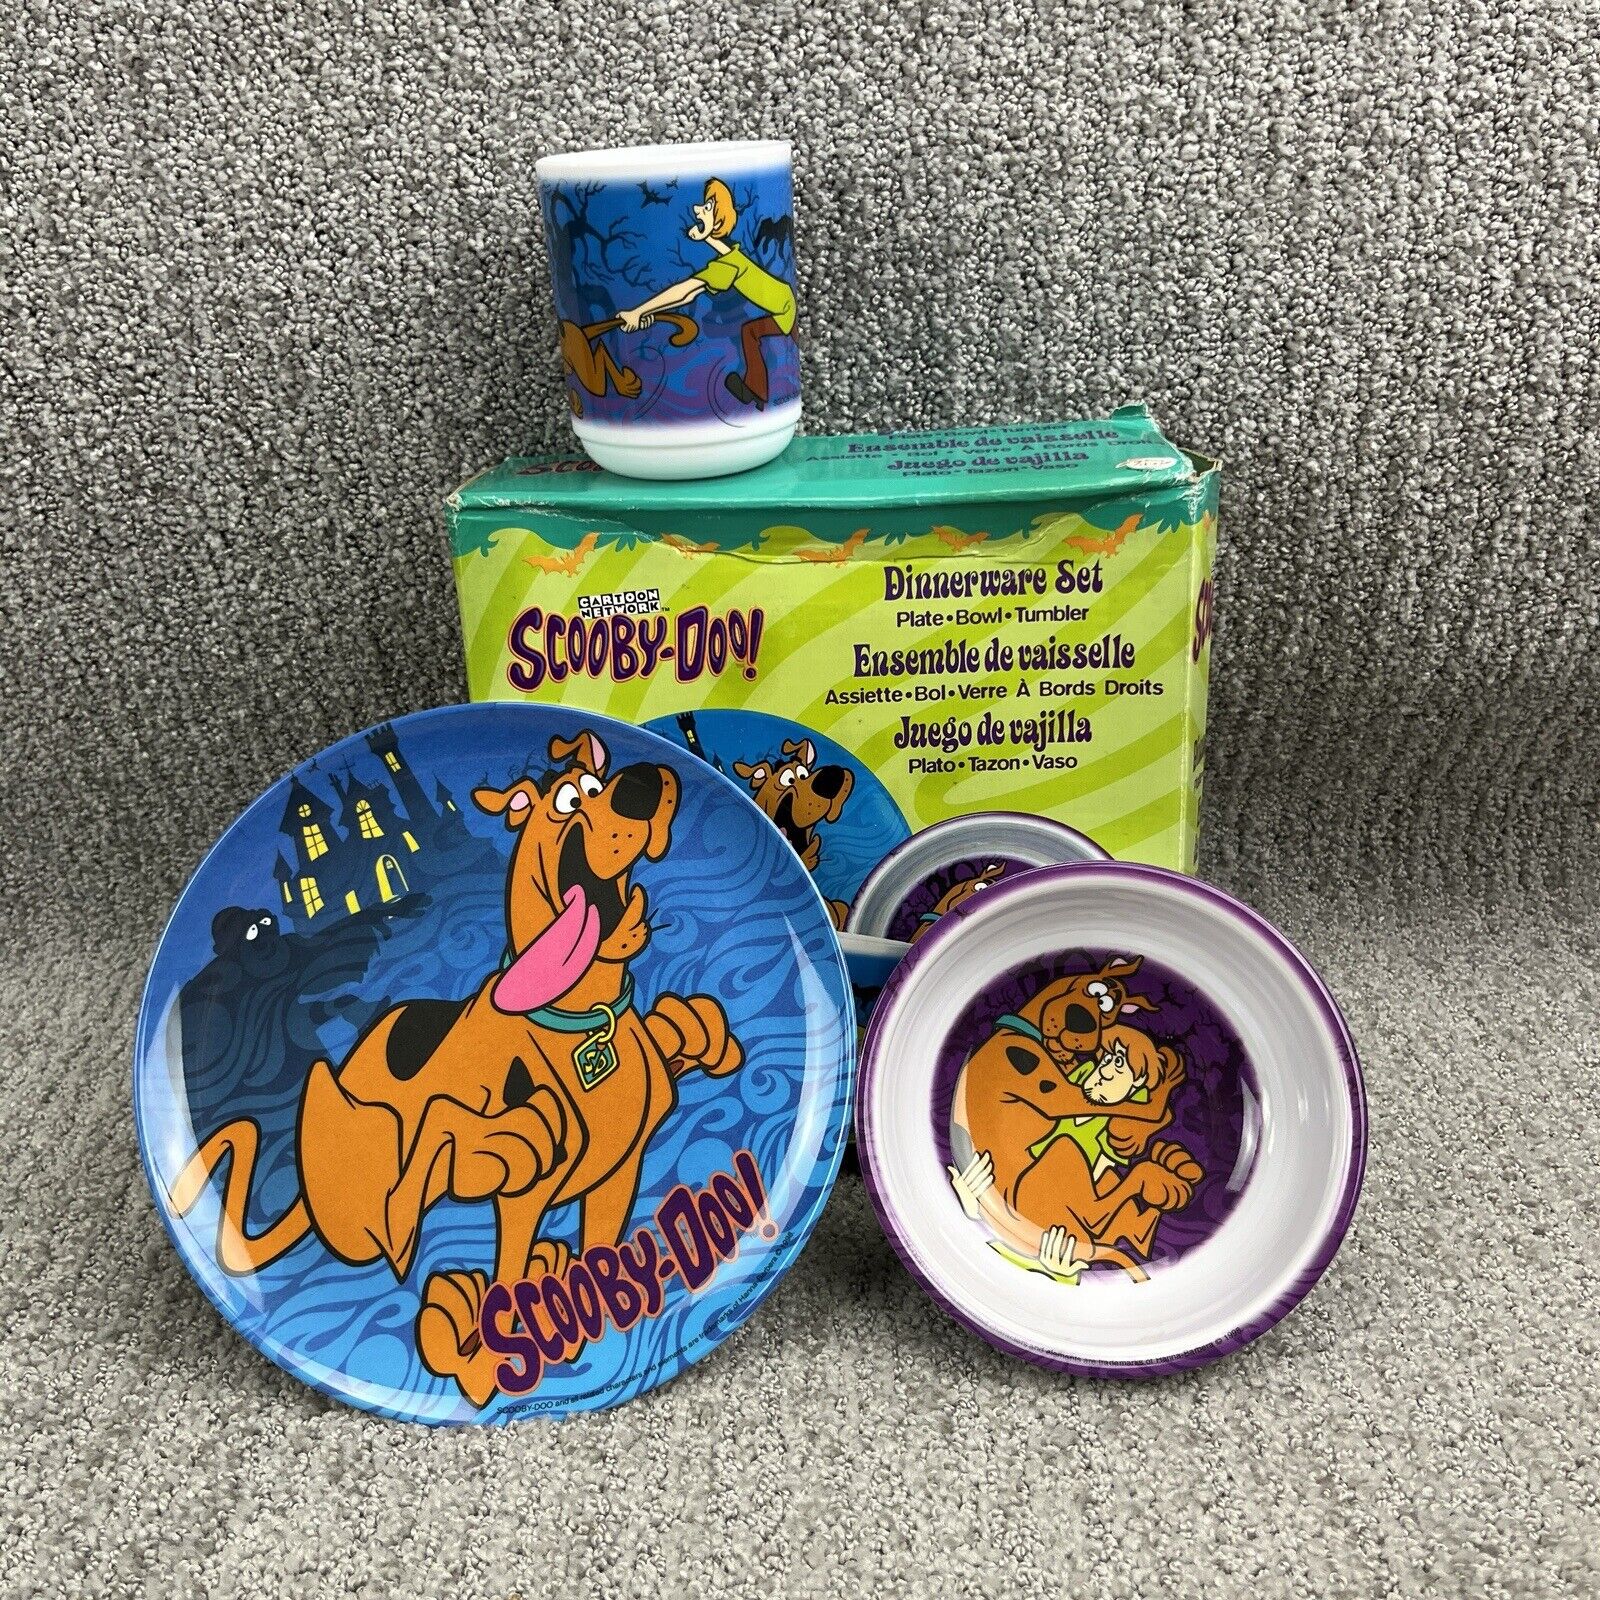 VTG Scooby Doo Kids 3 Pc Plastic Dinnerware Plate Bowl Cup NEW Damaged Box 1998